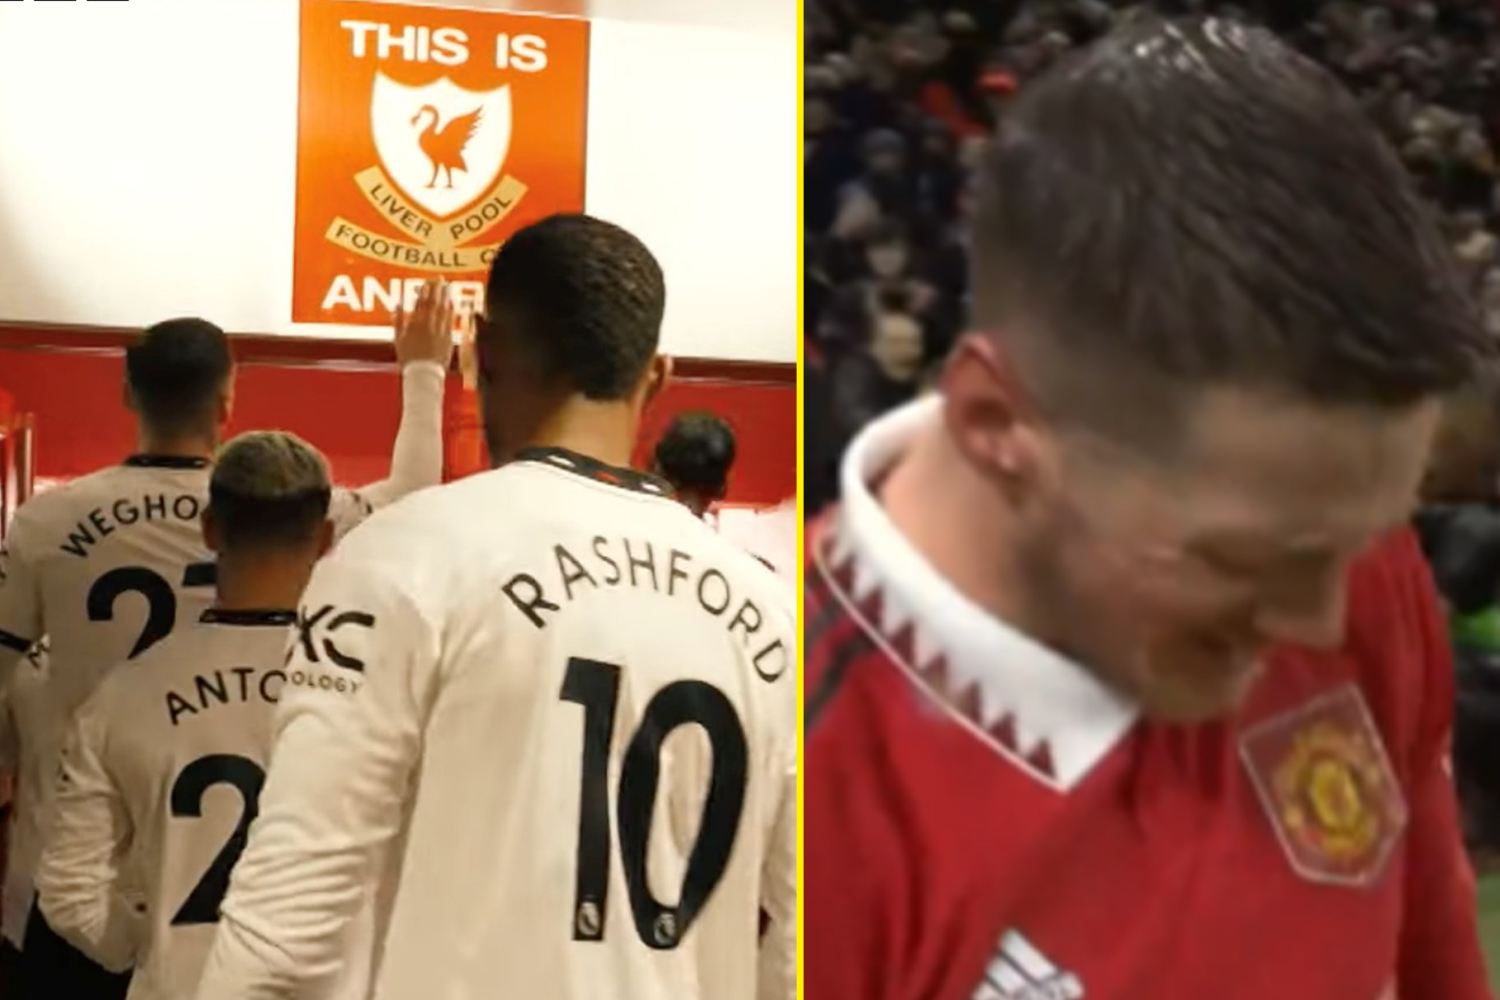 Wout Weghorst was close to tears after Manchester United goal against Real Betis in first appearance since furore over touching Anfield sign before Liverpool humiliation